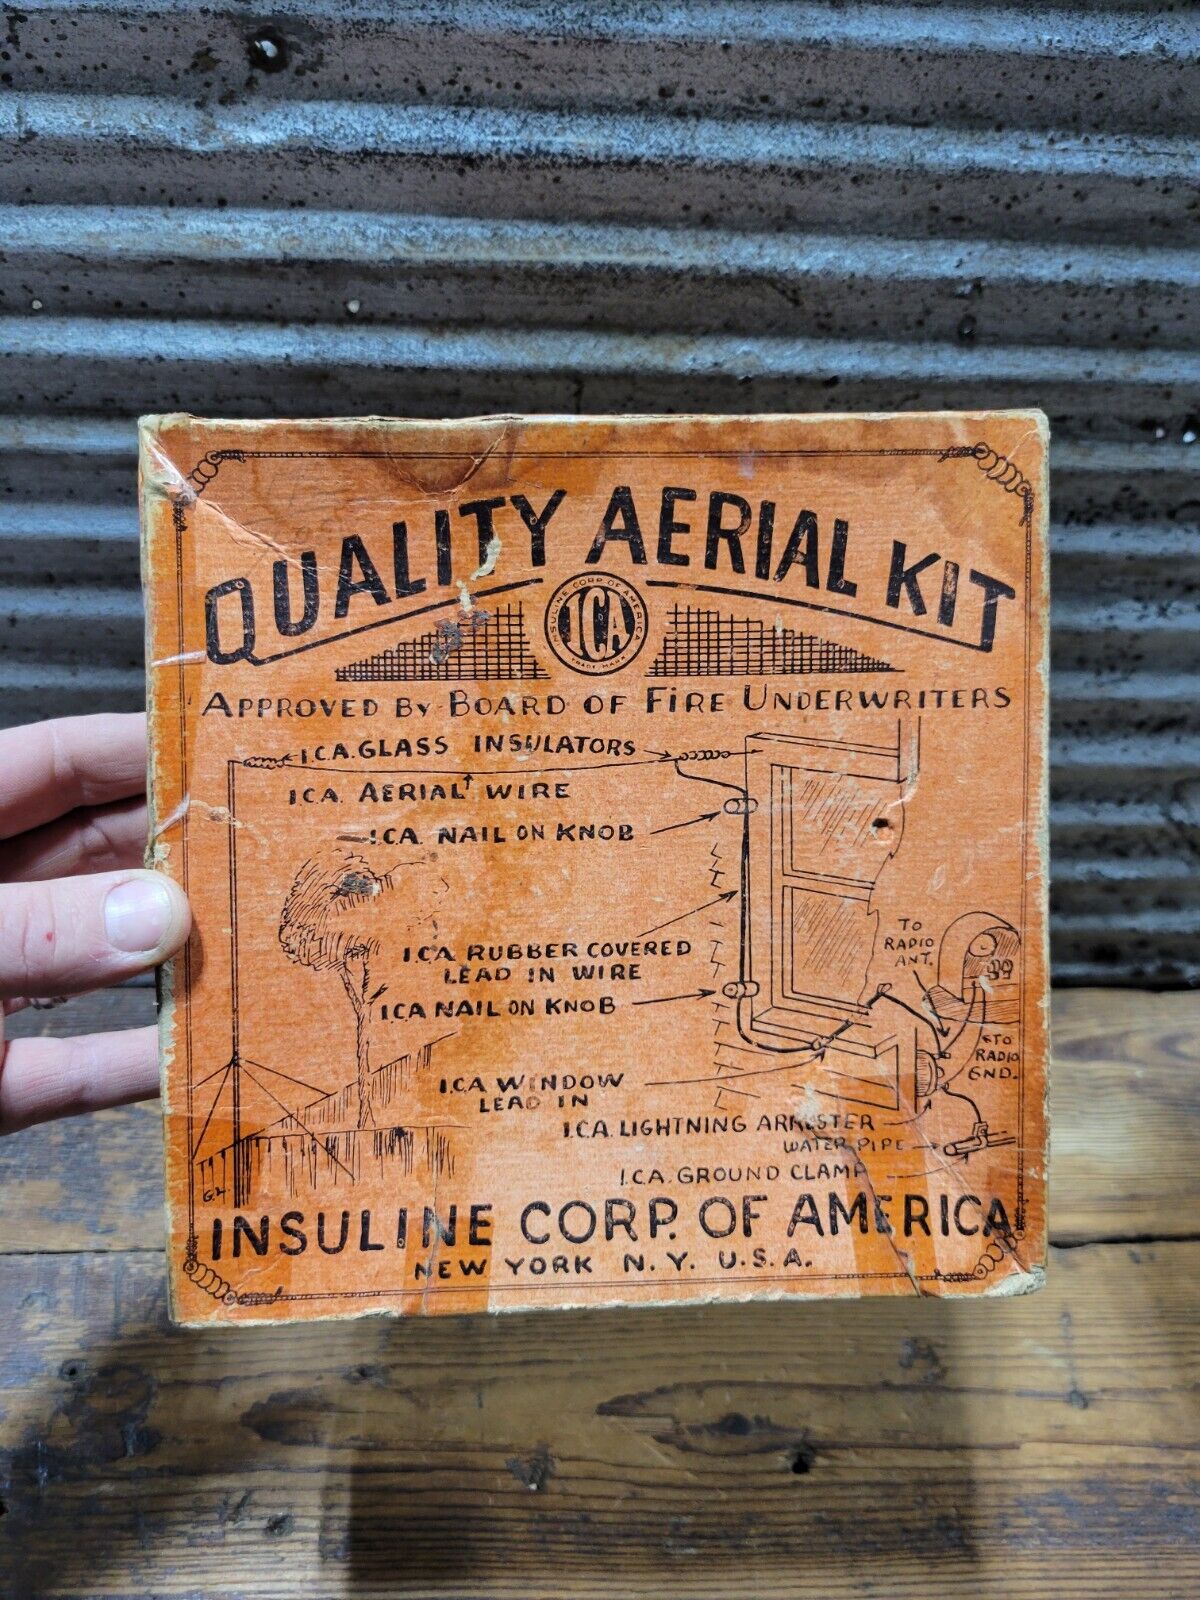 1920s Advertising Box Isuline Corp. Of AMERICA Quality Aerial Kit Electricity 